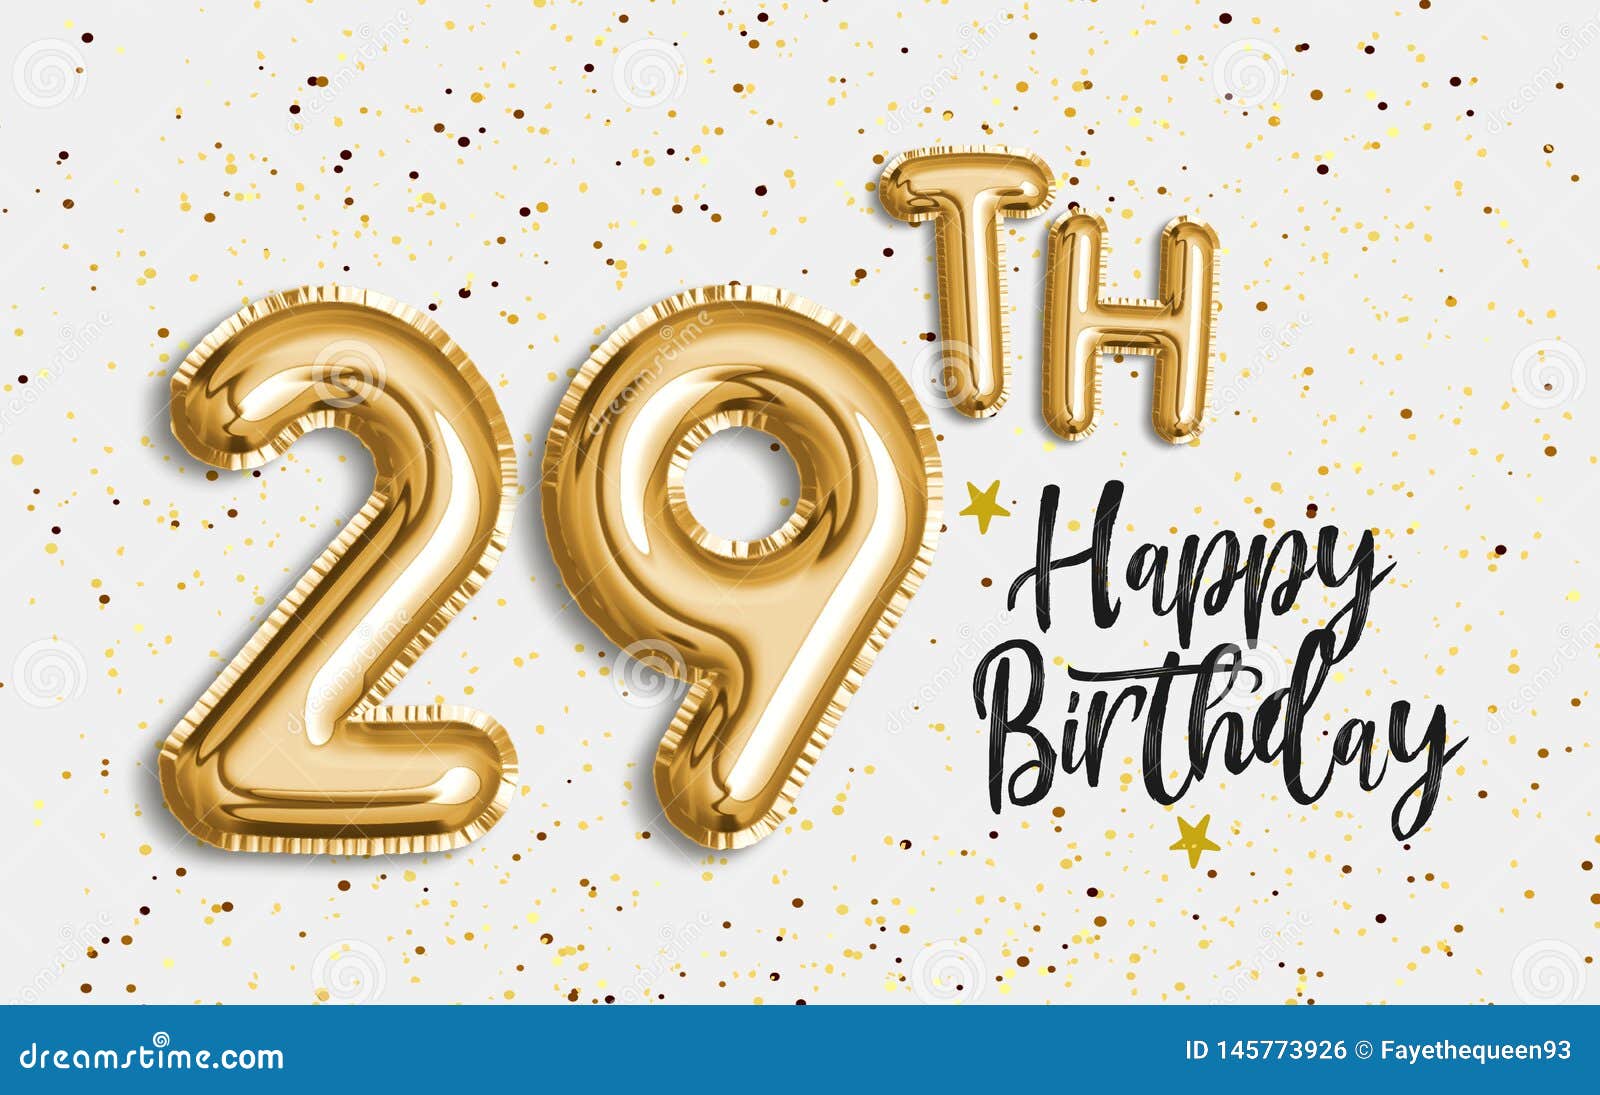 Happy 29th Birthday Gold Foil Balloon Greeting Background Stock